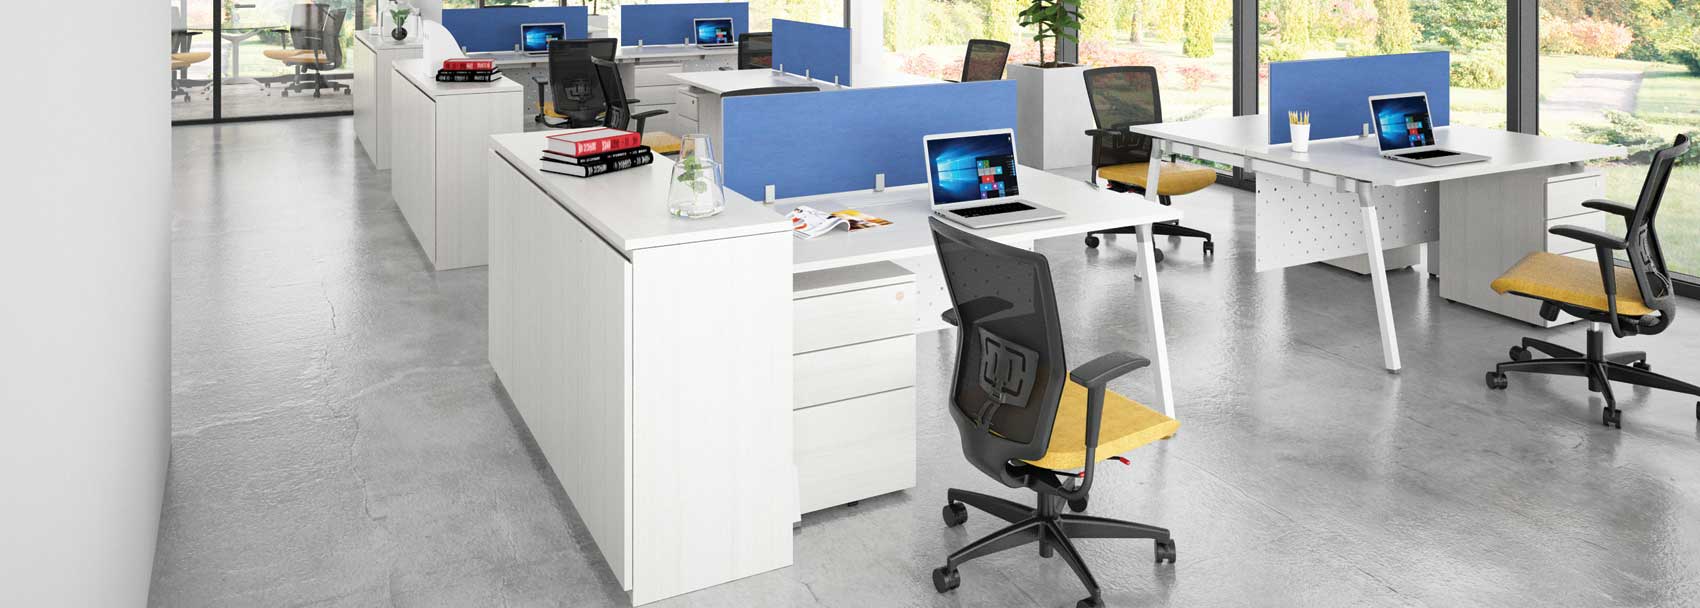 artiv workstation for open space office